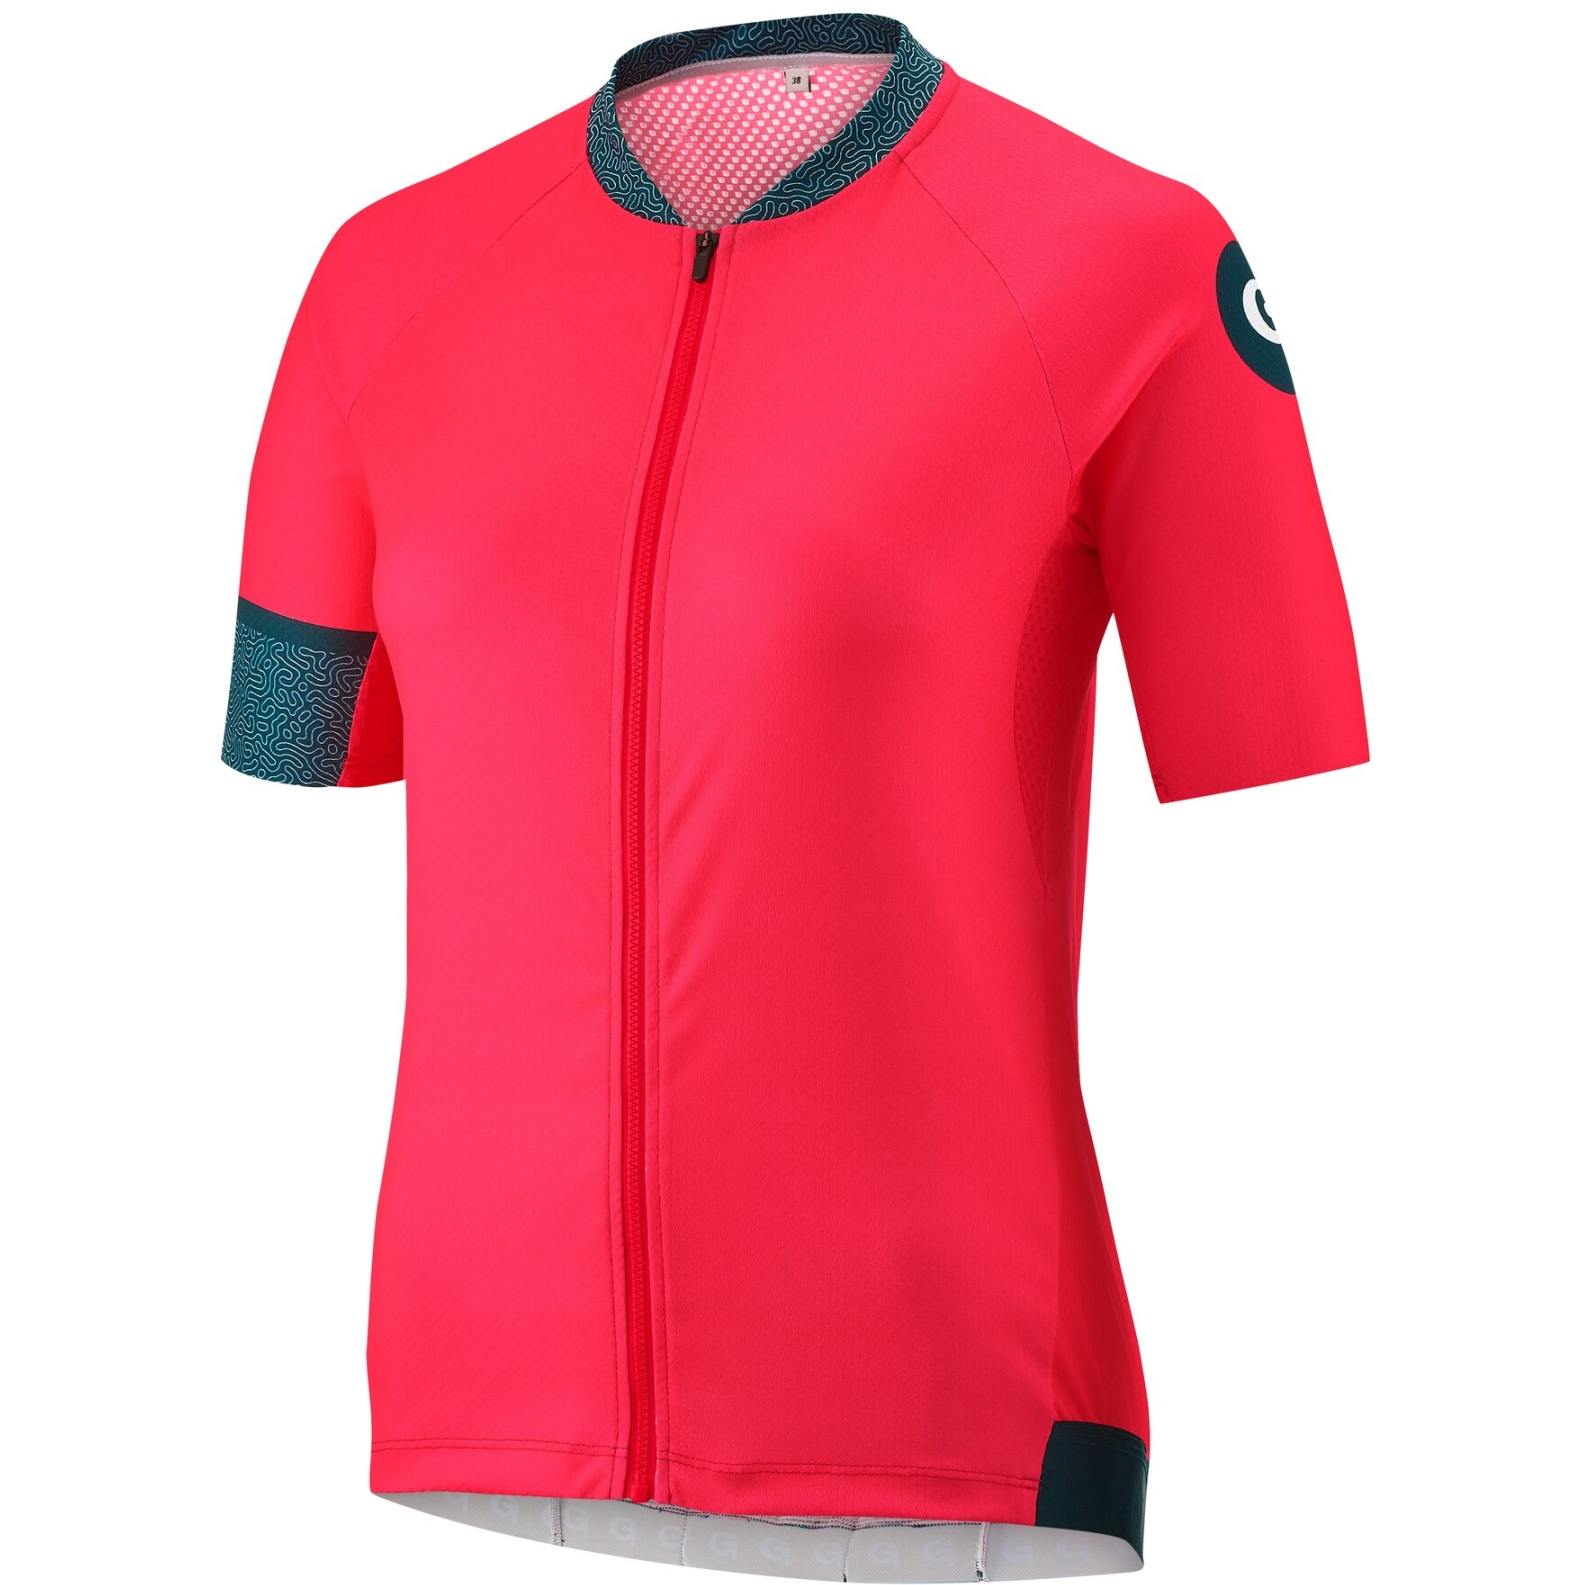 Foto de Gonso Maillot Ciclismo Mujer - Braila - Diva Pink